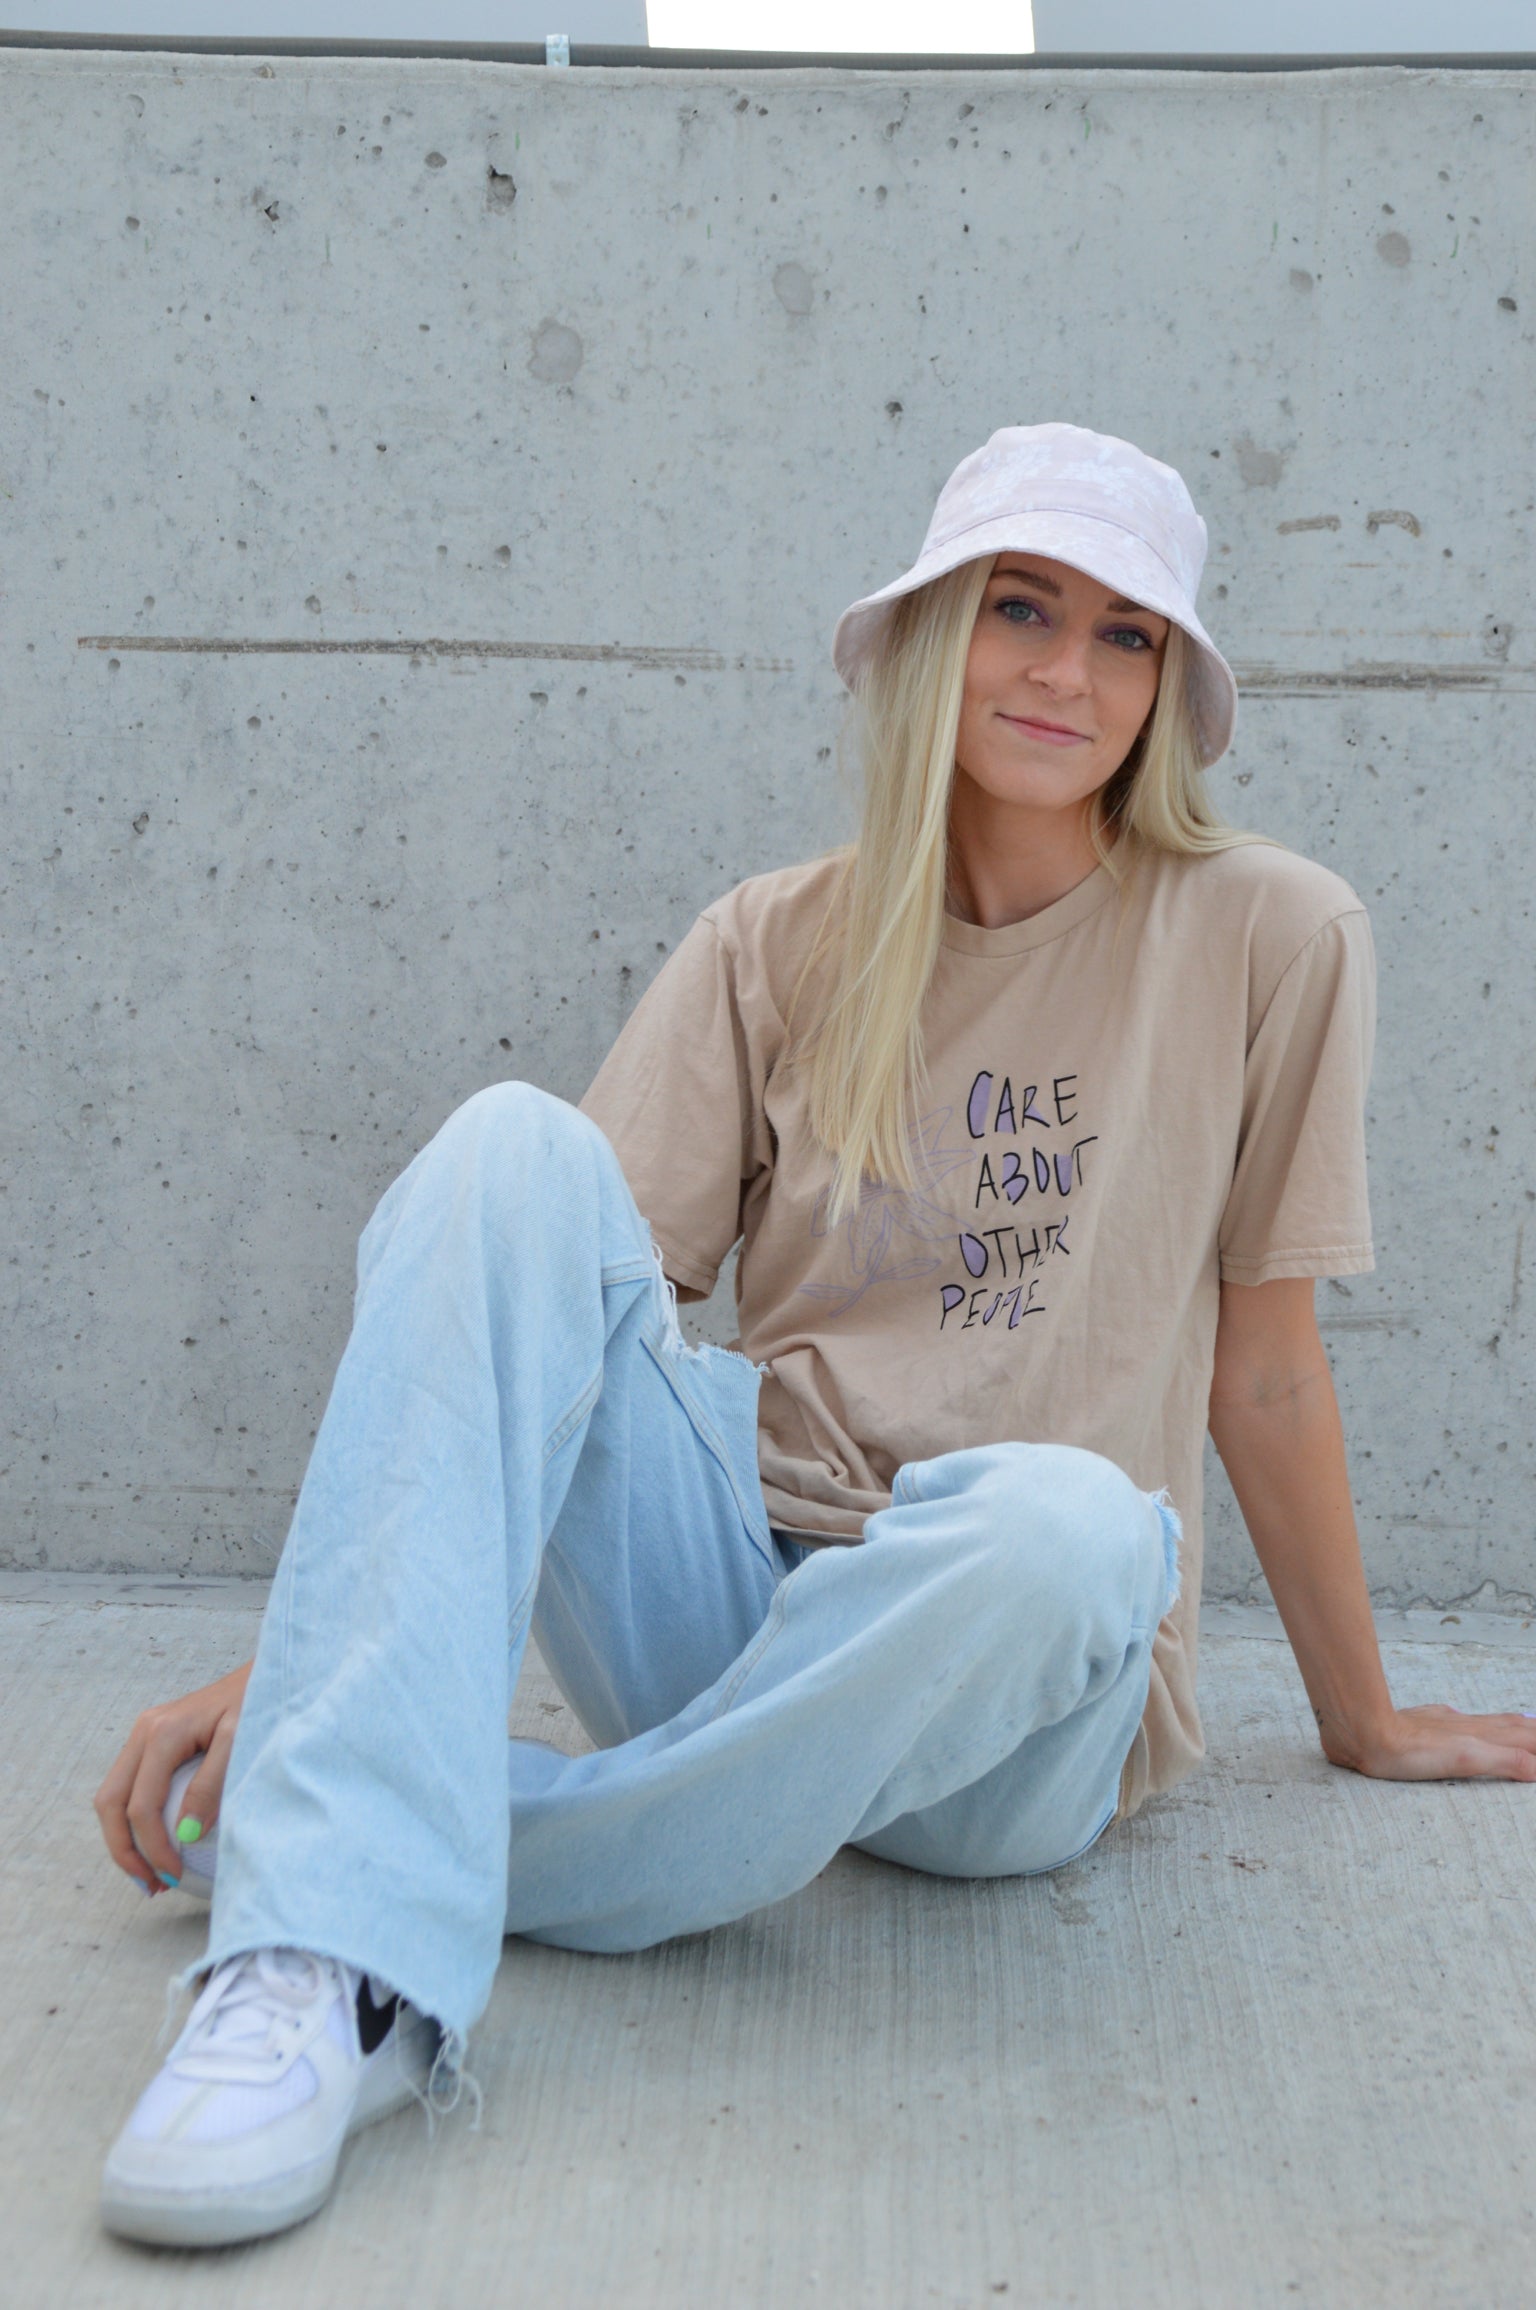 Care About Other People Tee on model